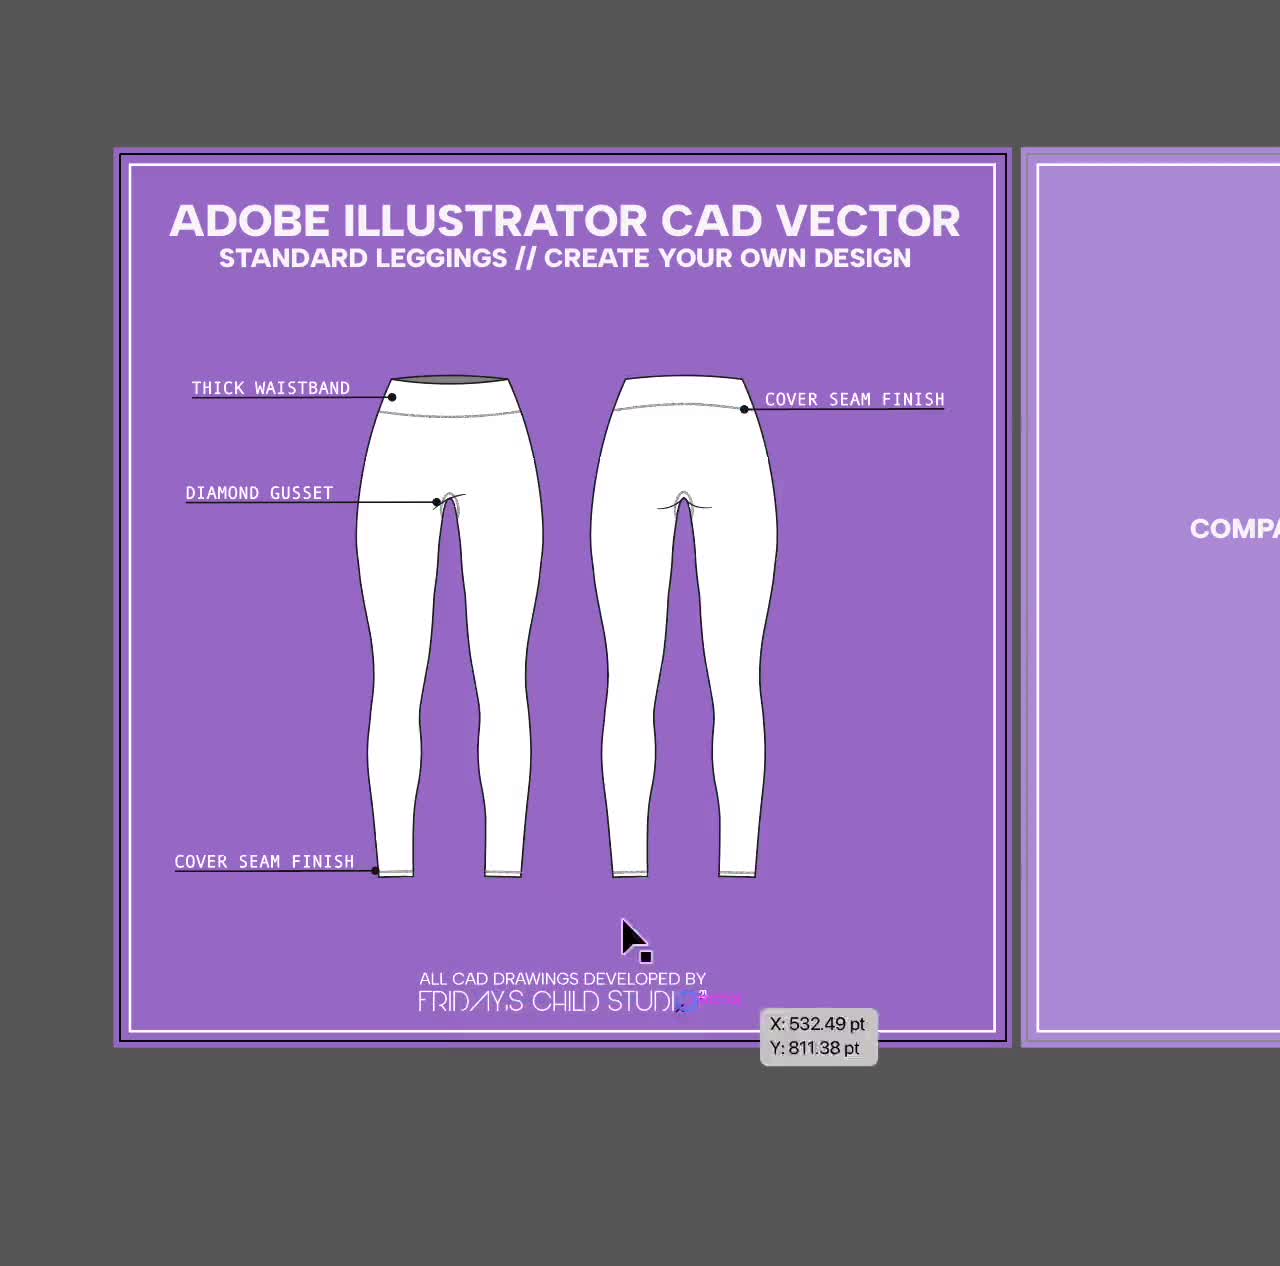 Legging Cad Cliparts, Stock Vector and Royalty Free Legging Cad